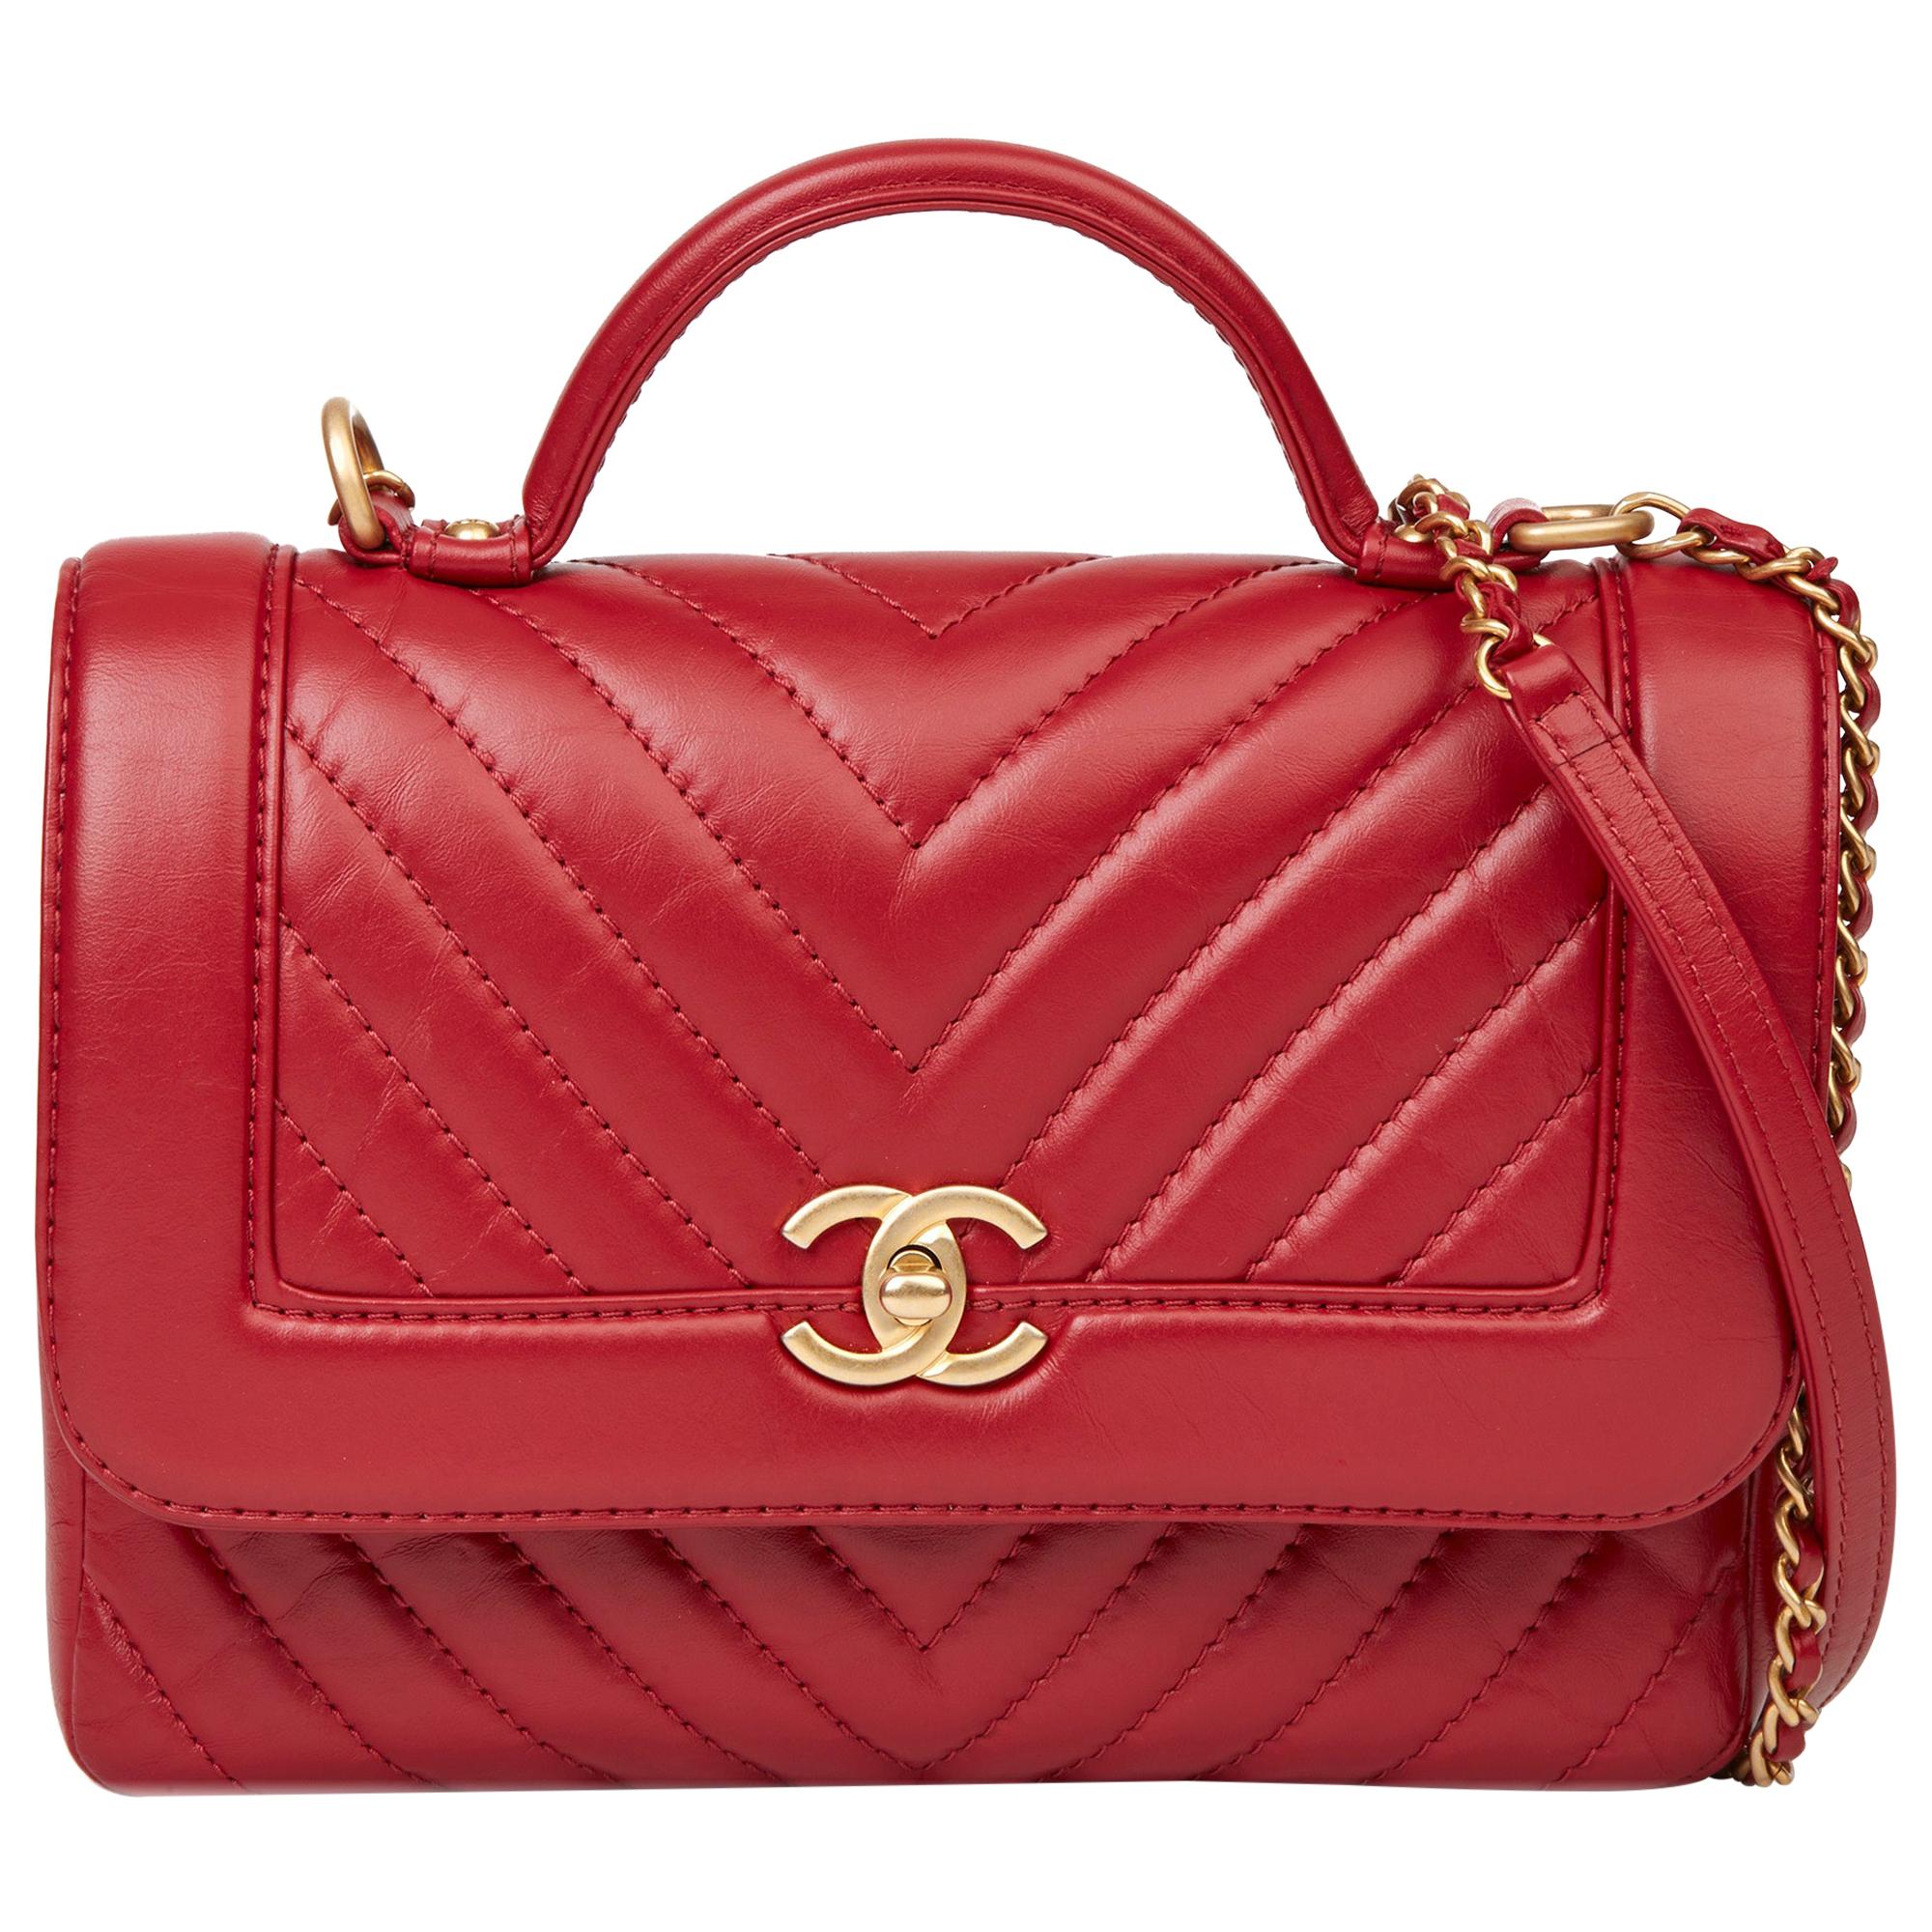 2018 Chanel Red Chevron Quilted Calfskin Leather Classic Top Flap Bag at 1stDibs | chanel red bag 2018, quilted top handle flap black, red chanel bag 2018